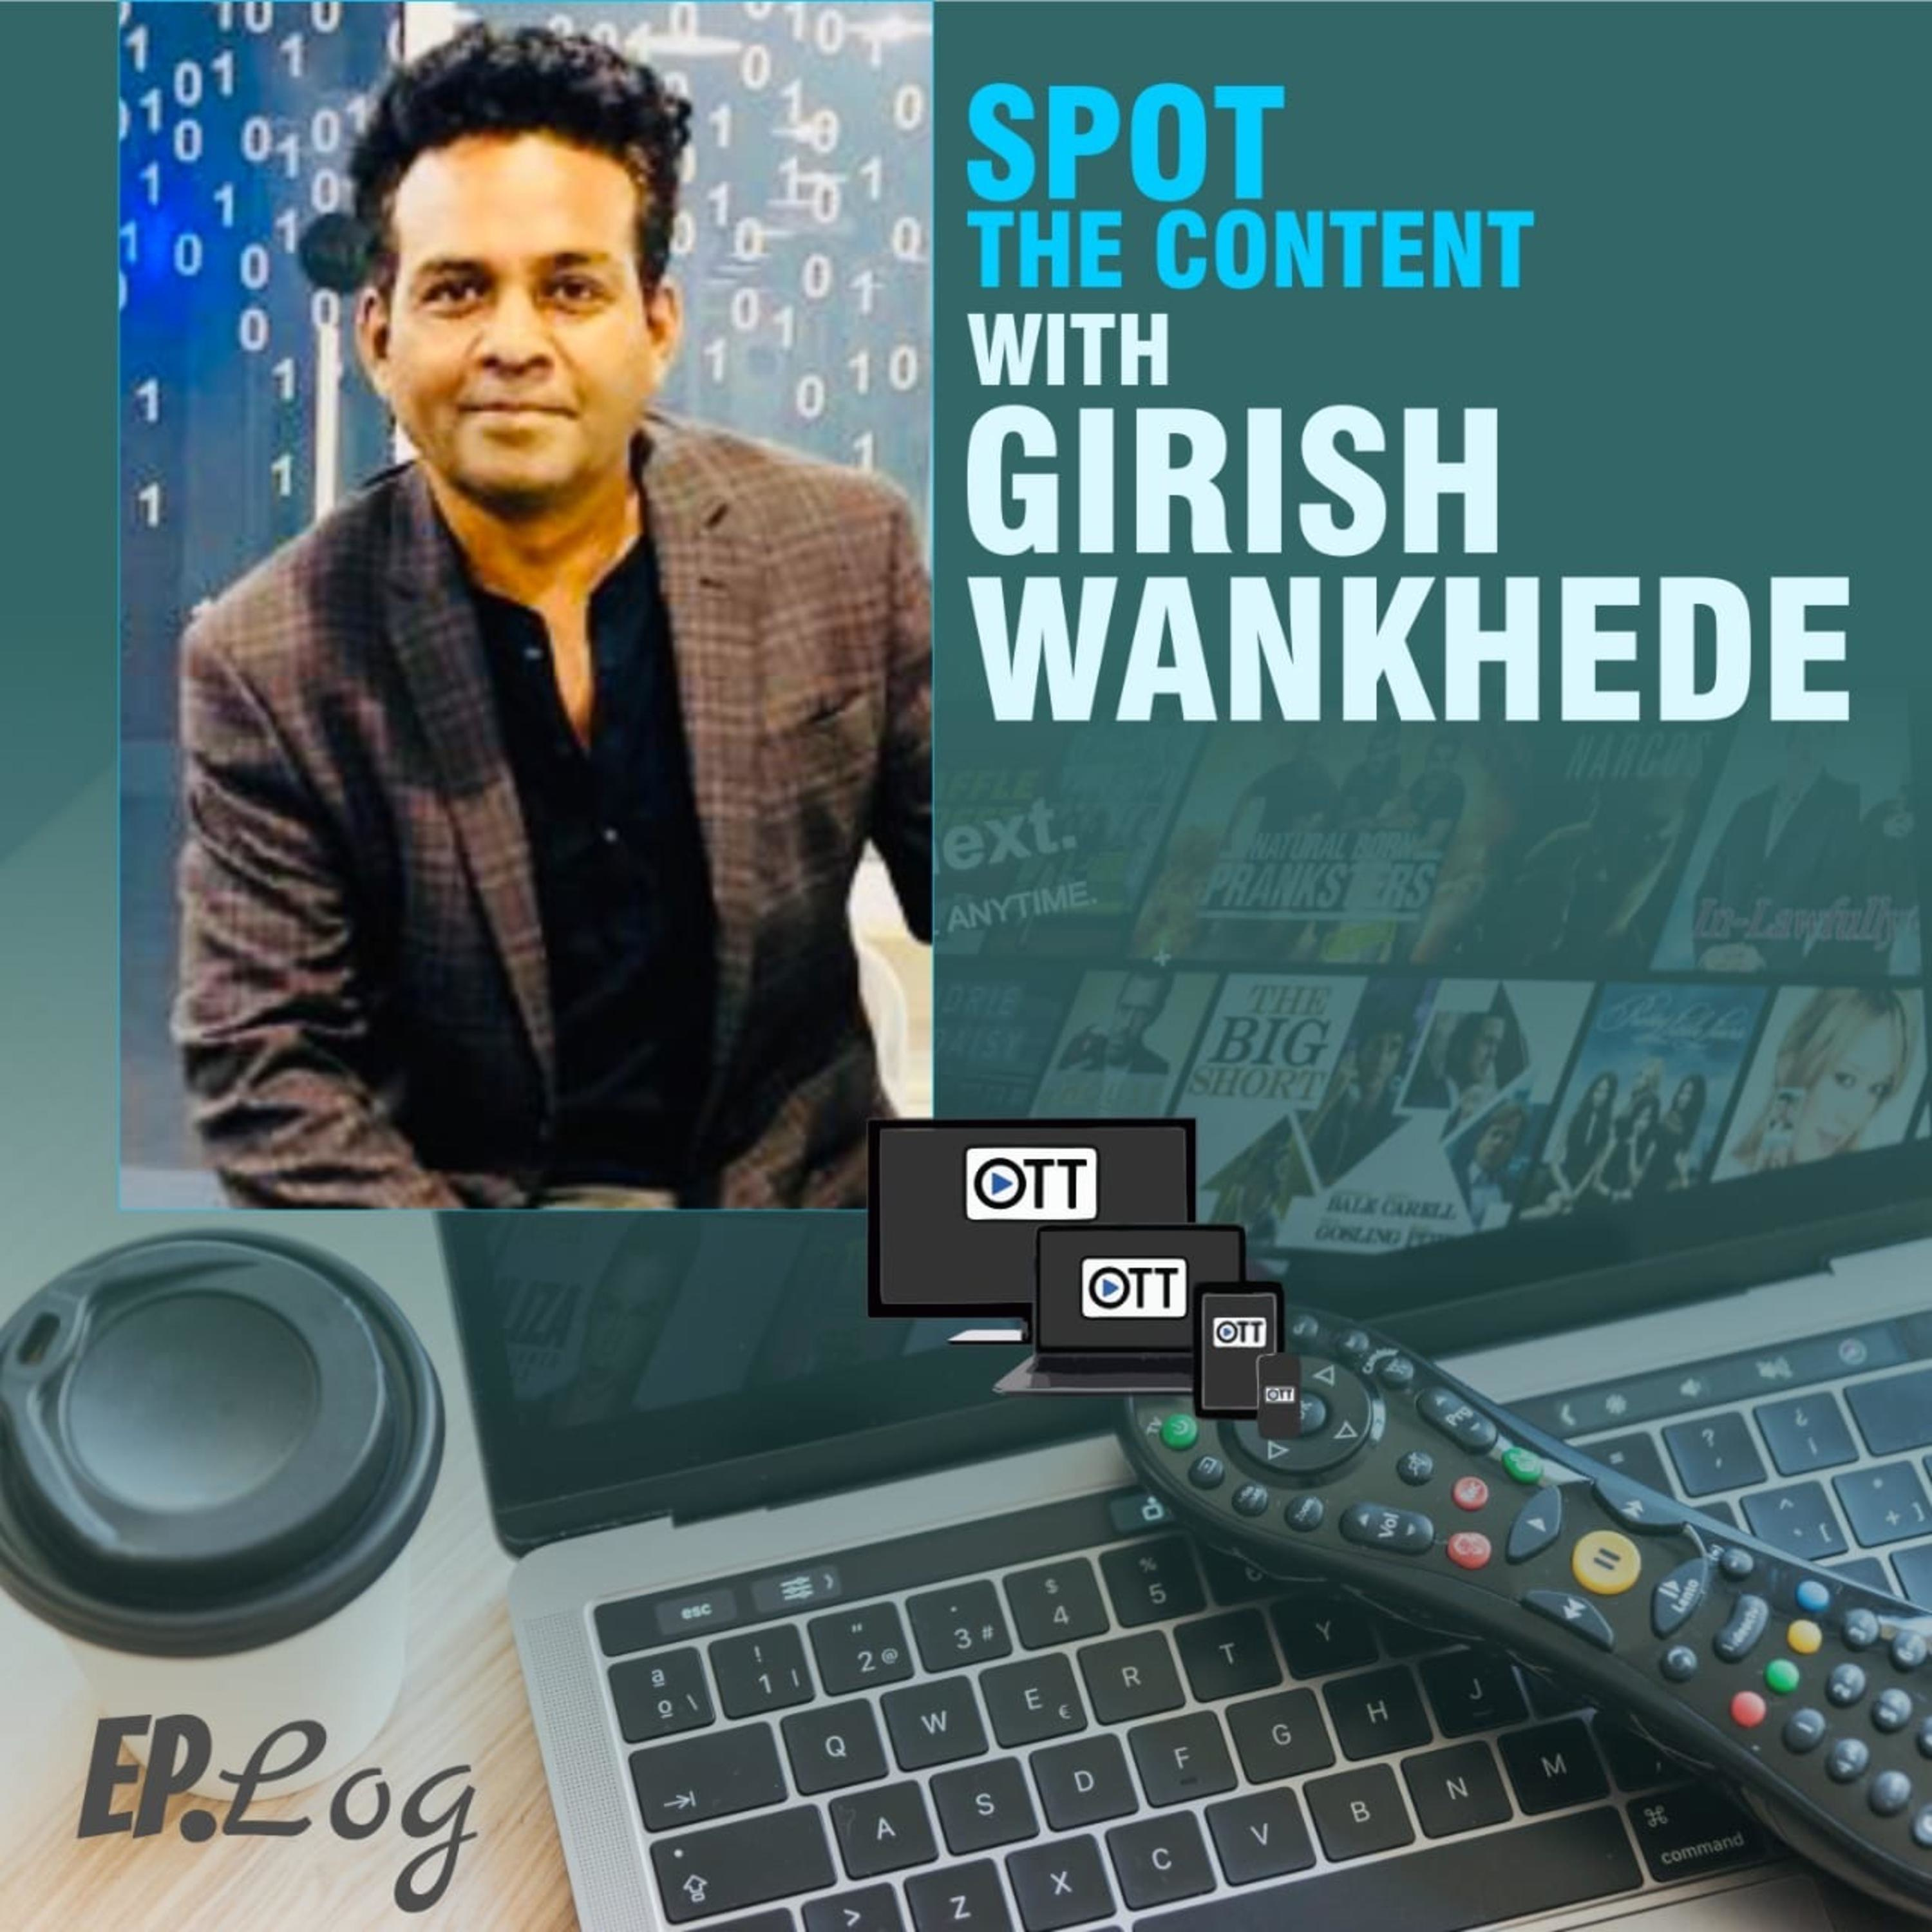 Spot The Content with Girish Wankhede Trailer